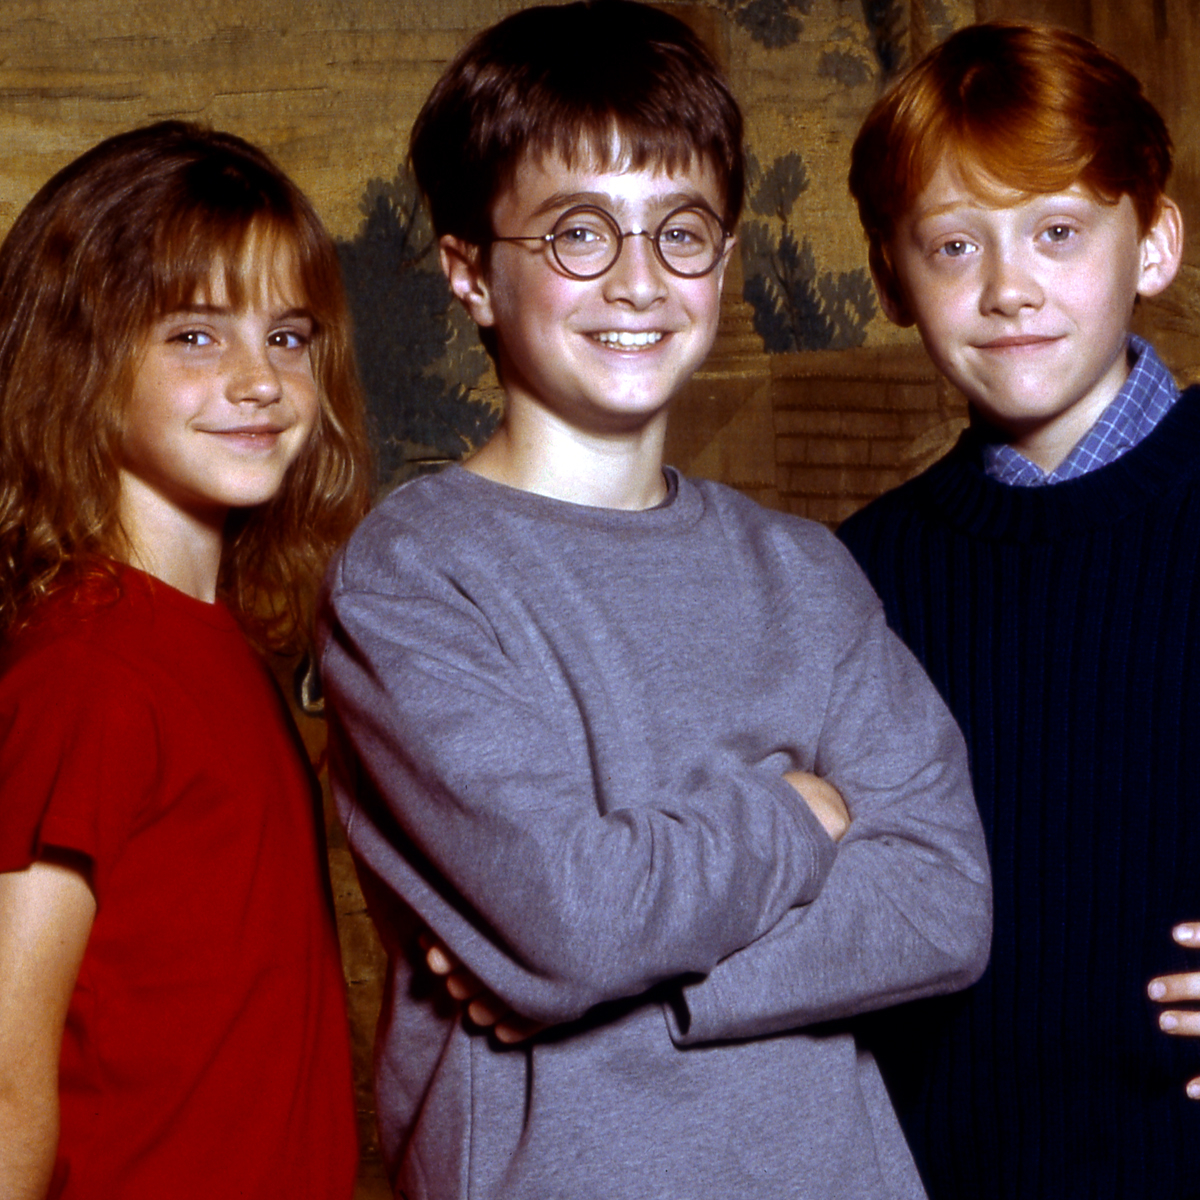 Hogwarts, horcruxes and hippogriffs: Harry Potter turns 20